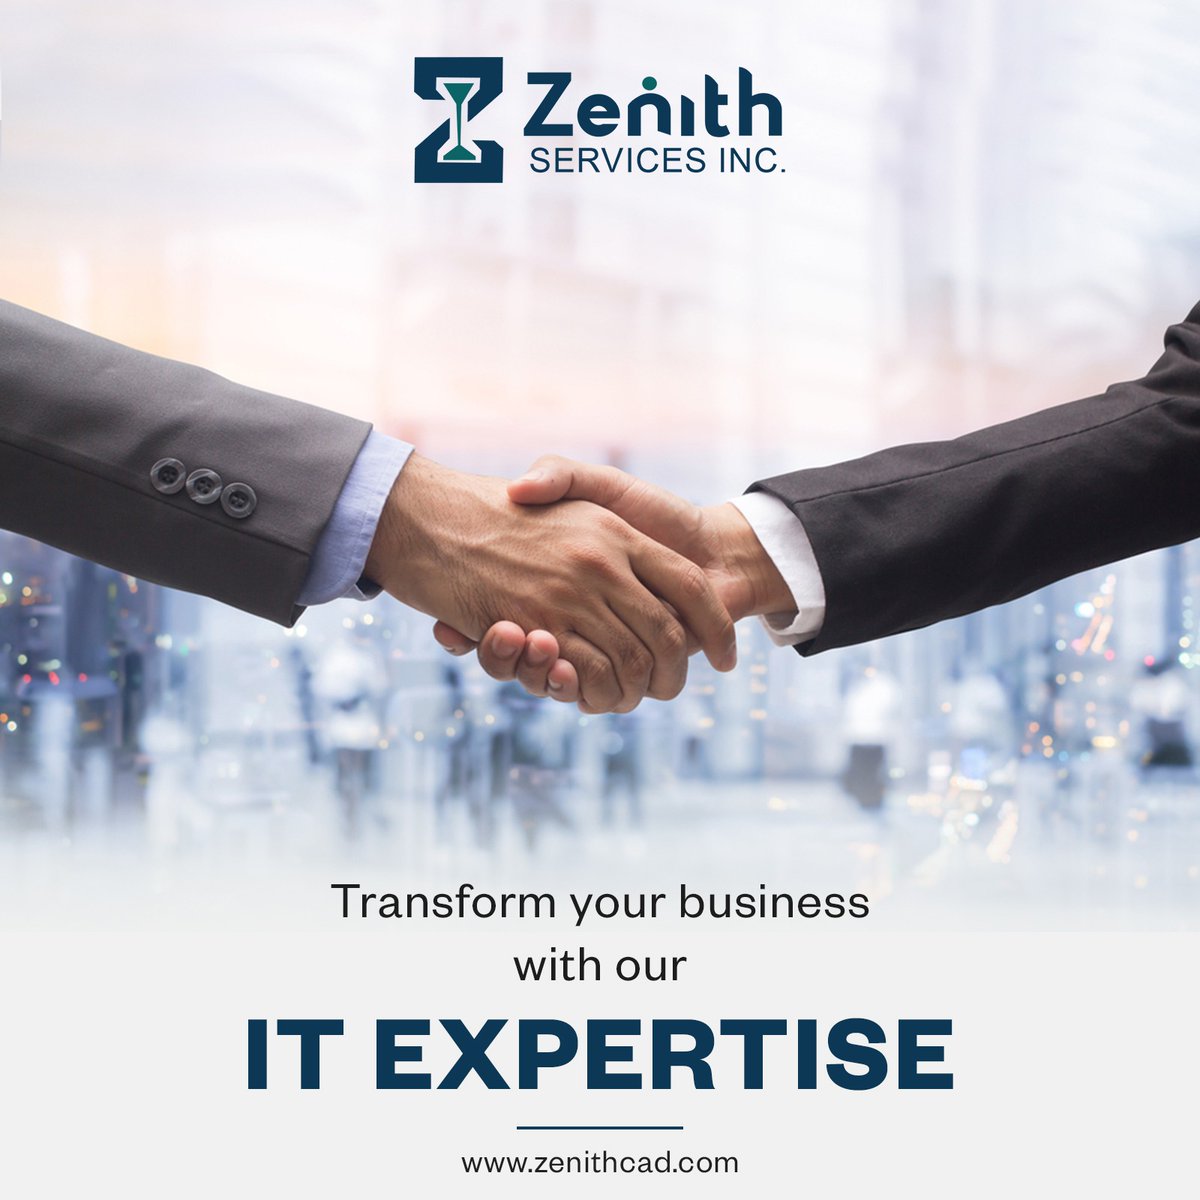 Our IT consulting services help your business enhance performance, scalability, & profit margins.

zenithcad.com

#zenithcadservices #itconsultingservices #itconsulting #consulting #itstaffing #staffing #itstaffingsolution #staffingsolution #data #ai  #itservices